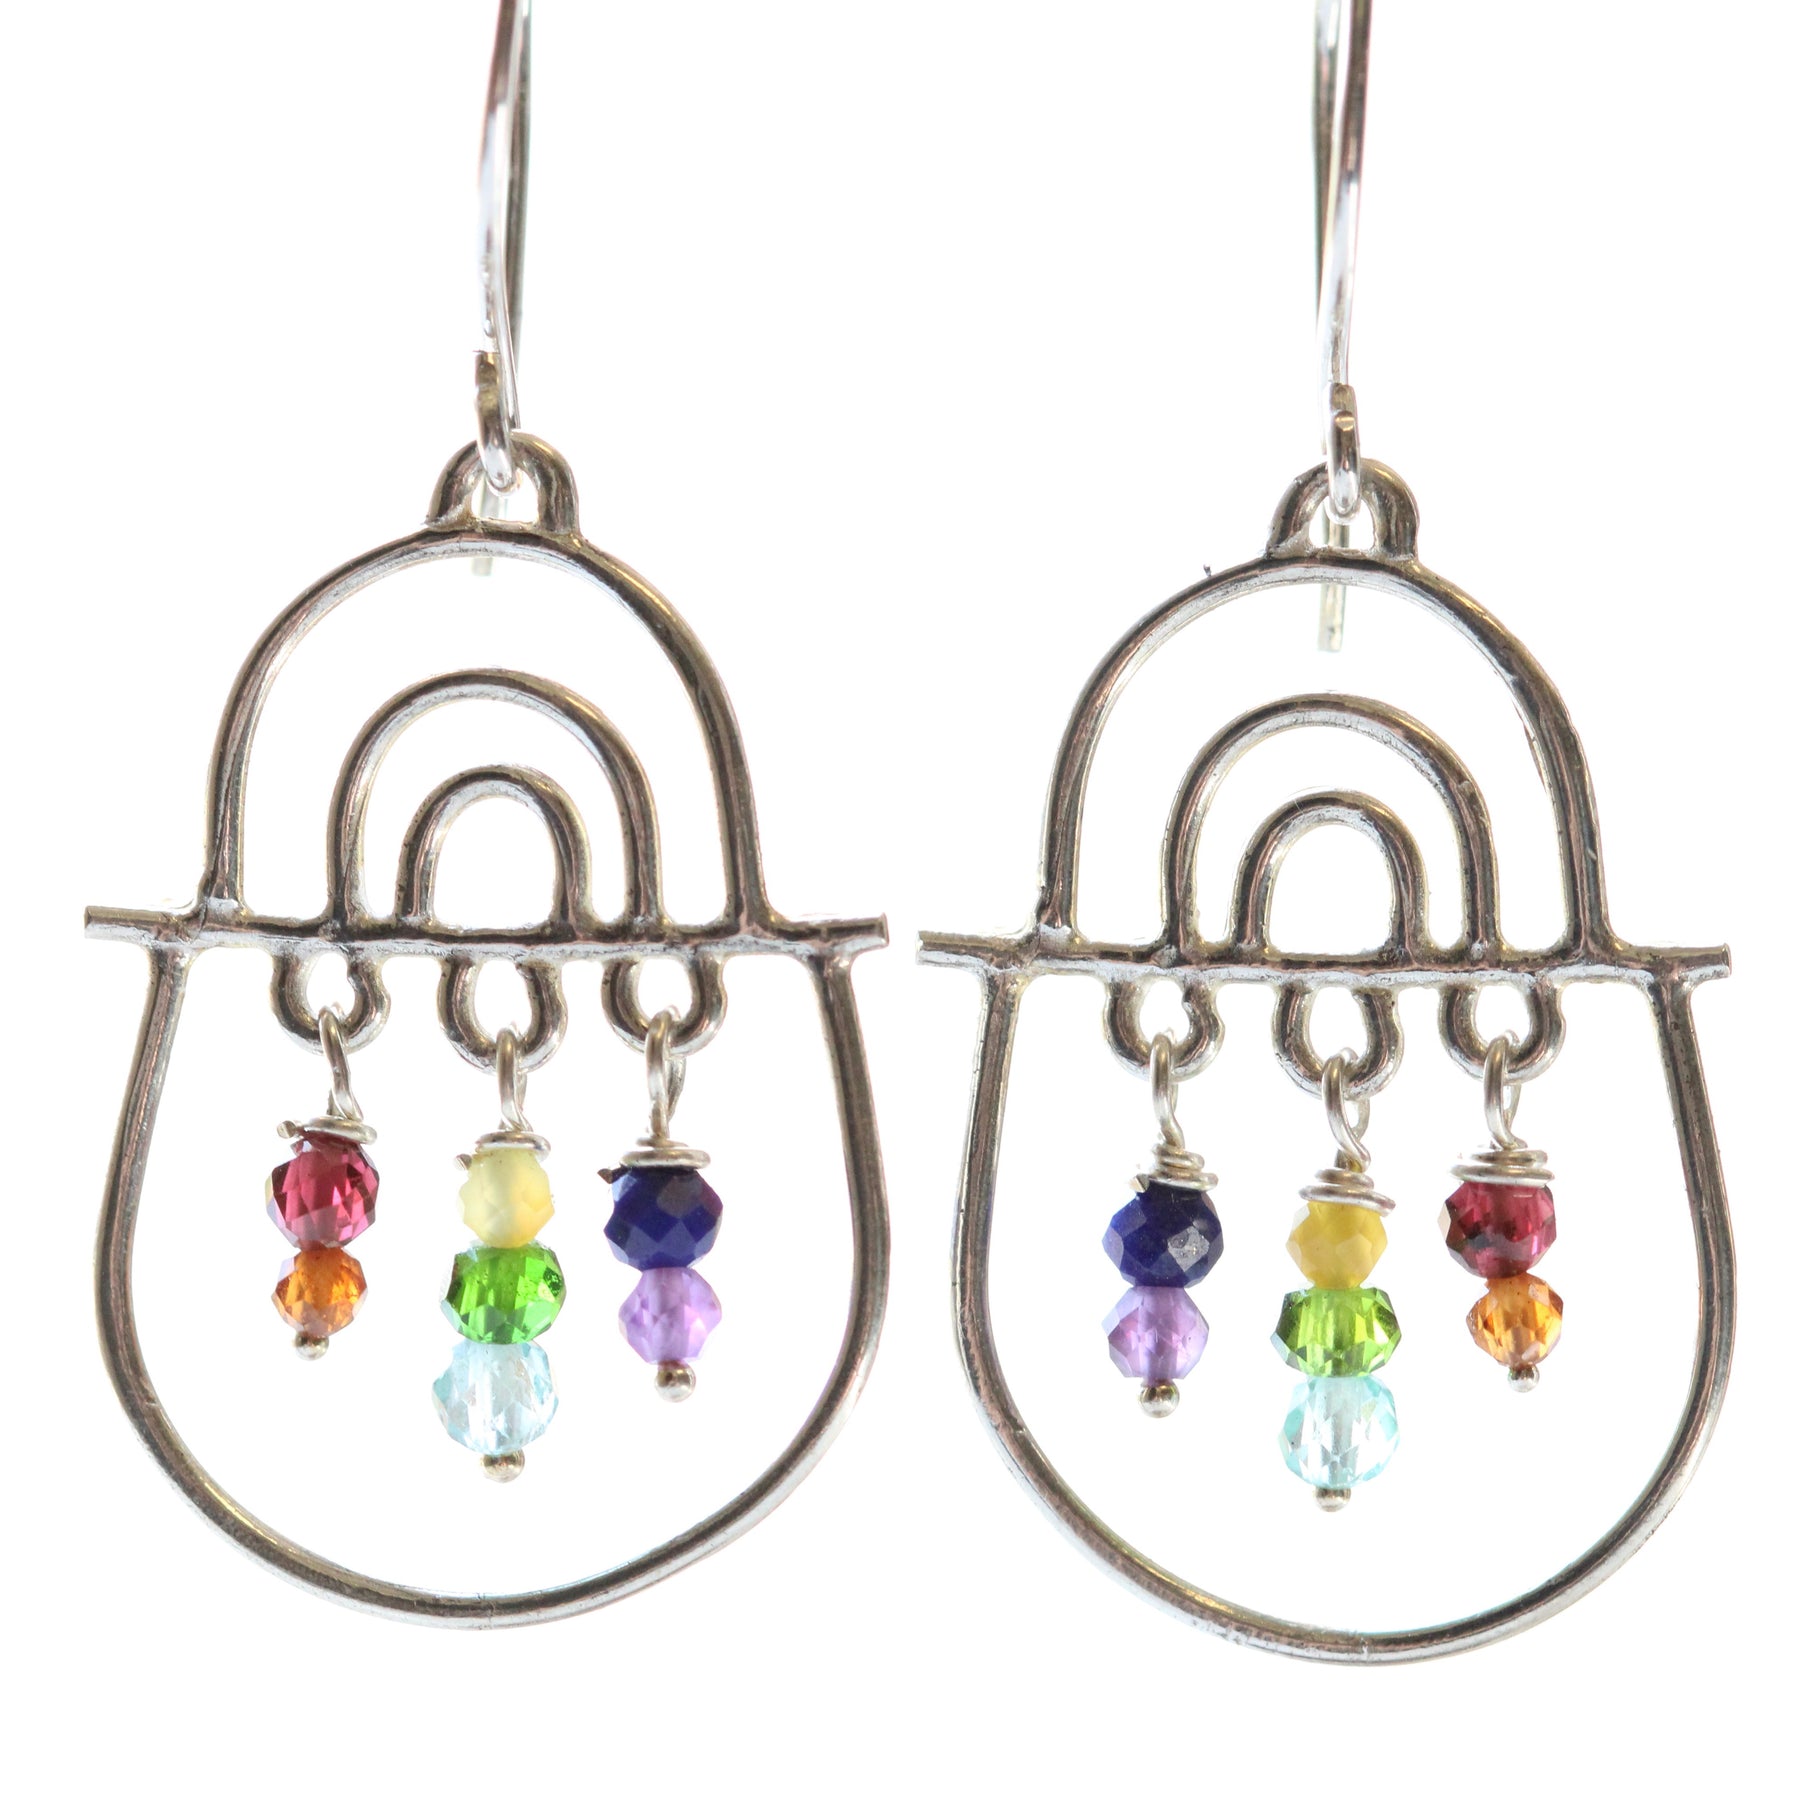 Joyful days Sterling Silver and mixed gemstone earrings.